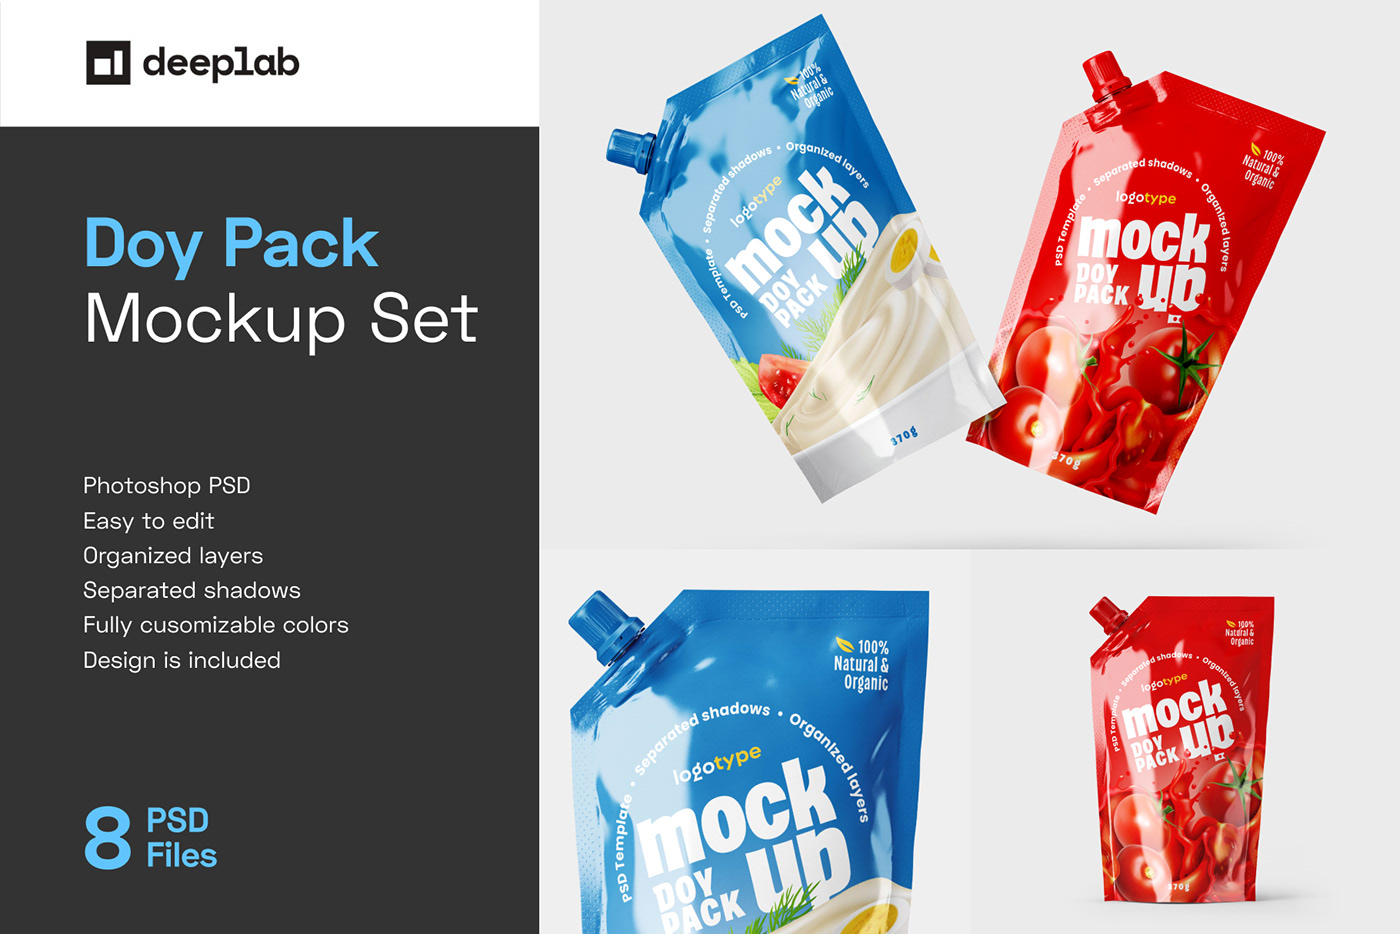 doypack ketchub Label mayonnaise Mockup Packaging photoshop pouch souce free